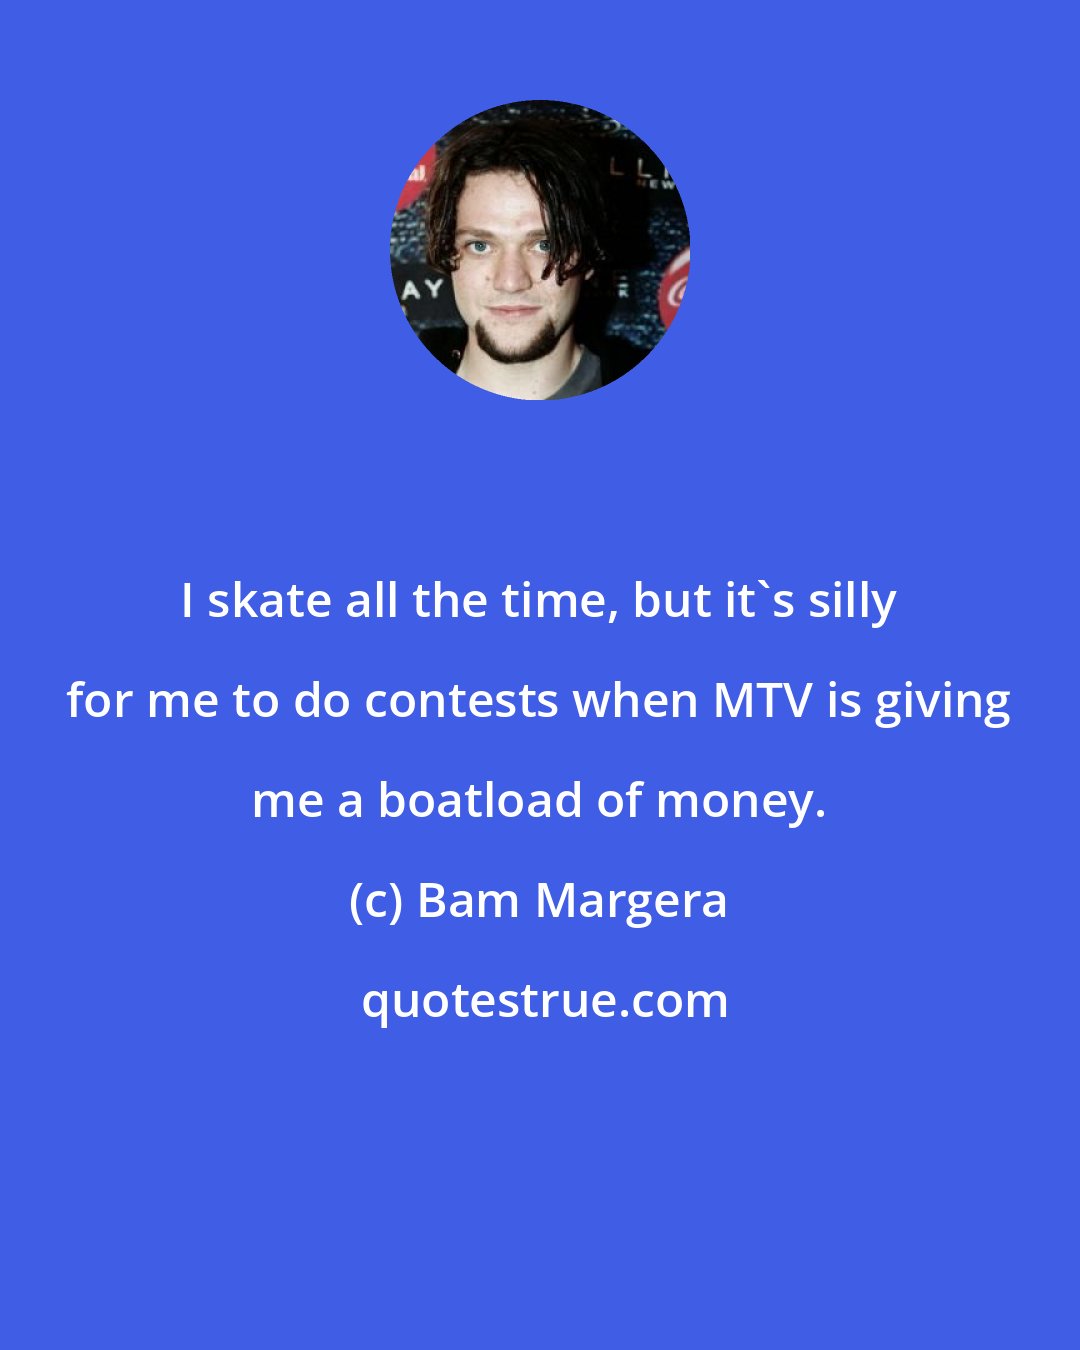 Bam Margera: I skate all the time, but it's silly for me to do contests when MTV is giving me a boatload of money.